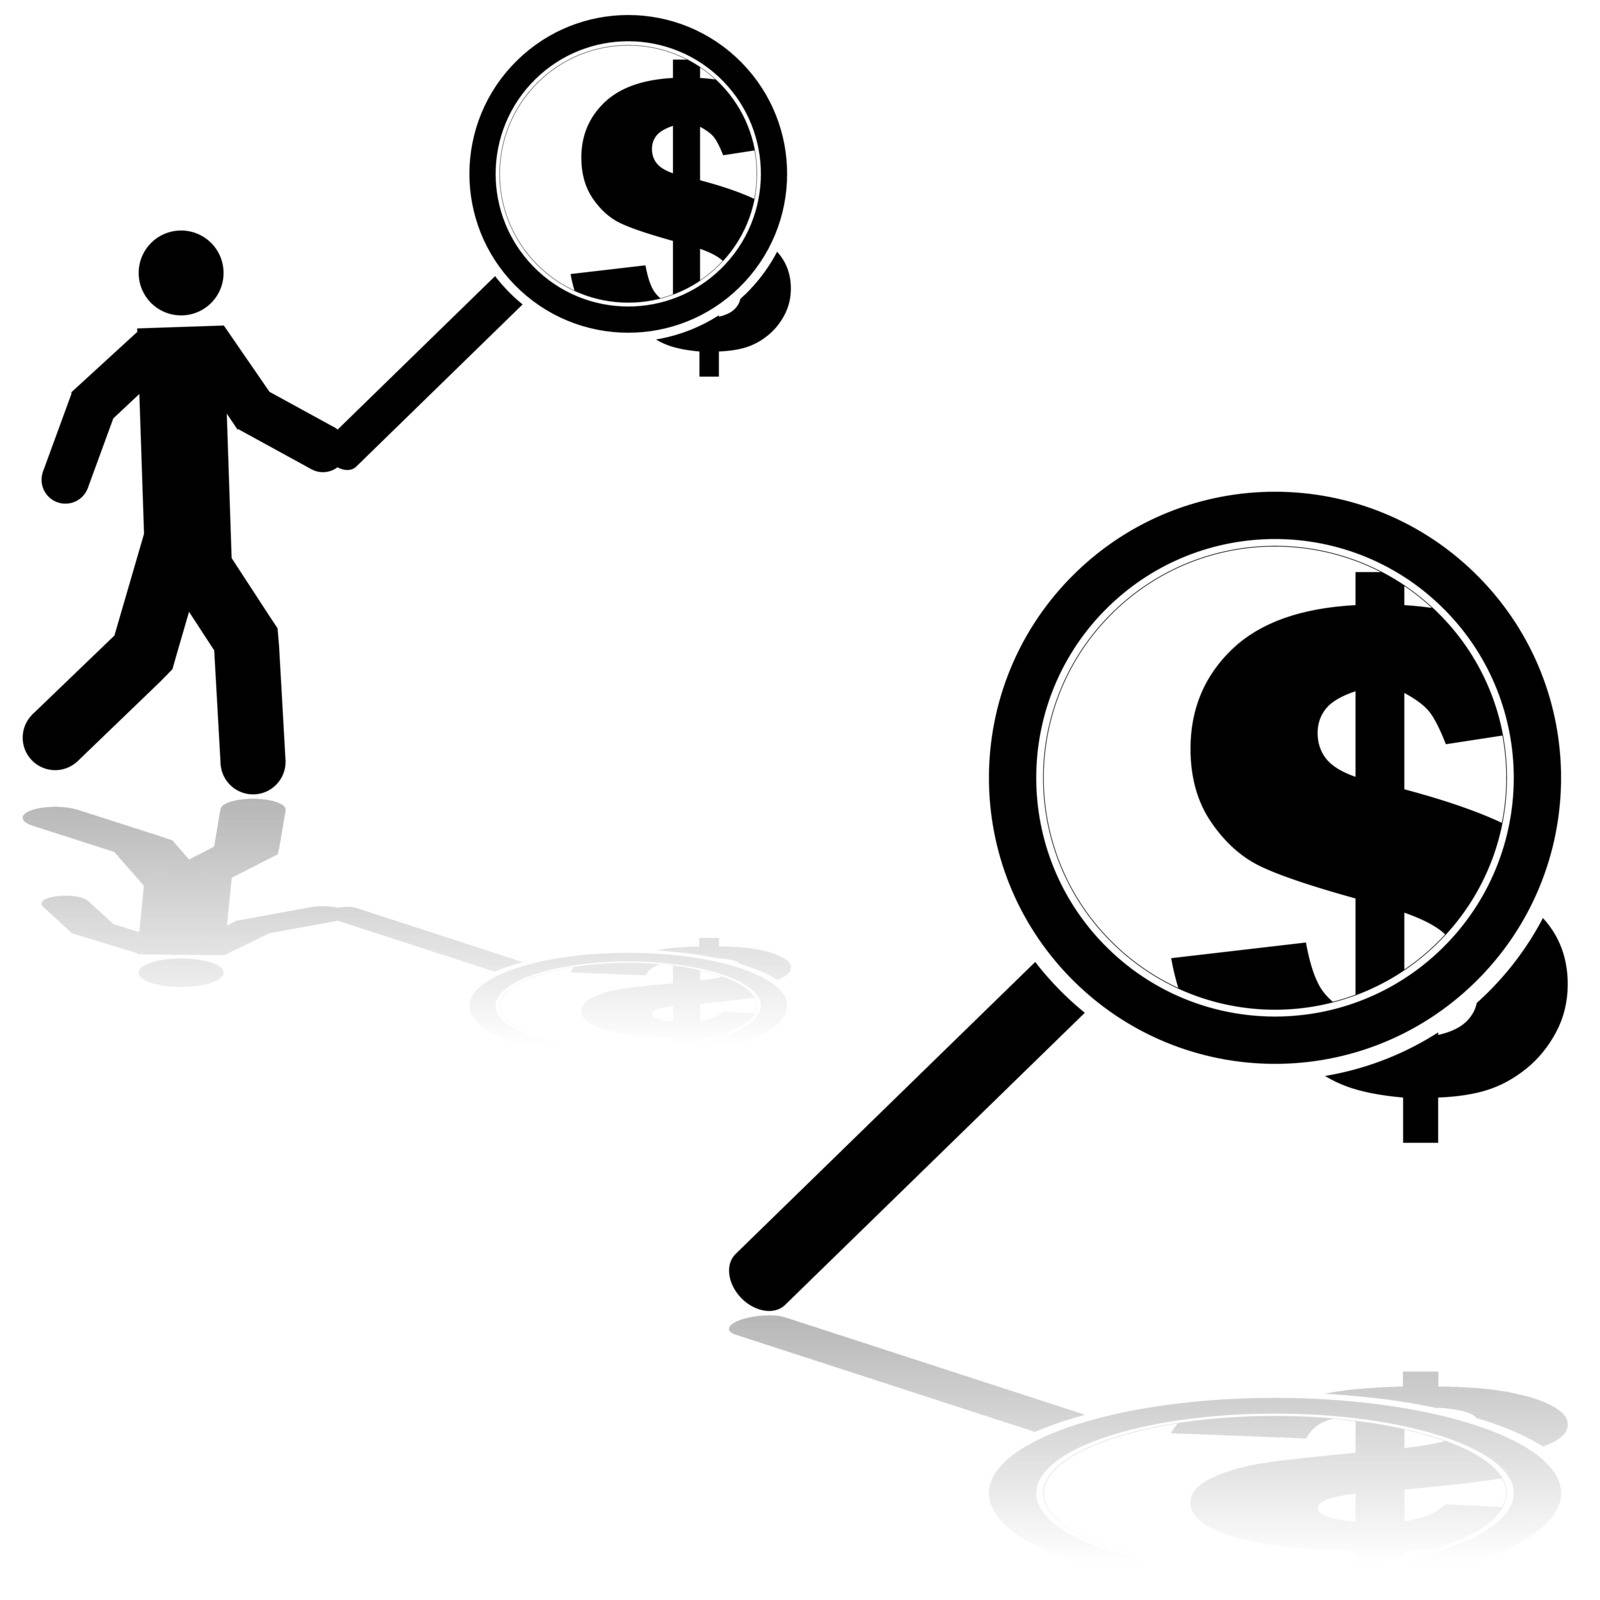 Concept illustration showing a man searching for money and a magnifying glass over a dollar sign